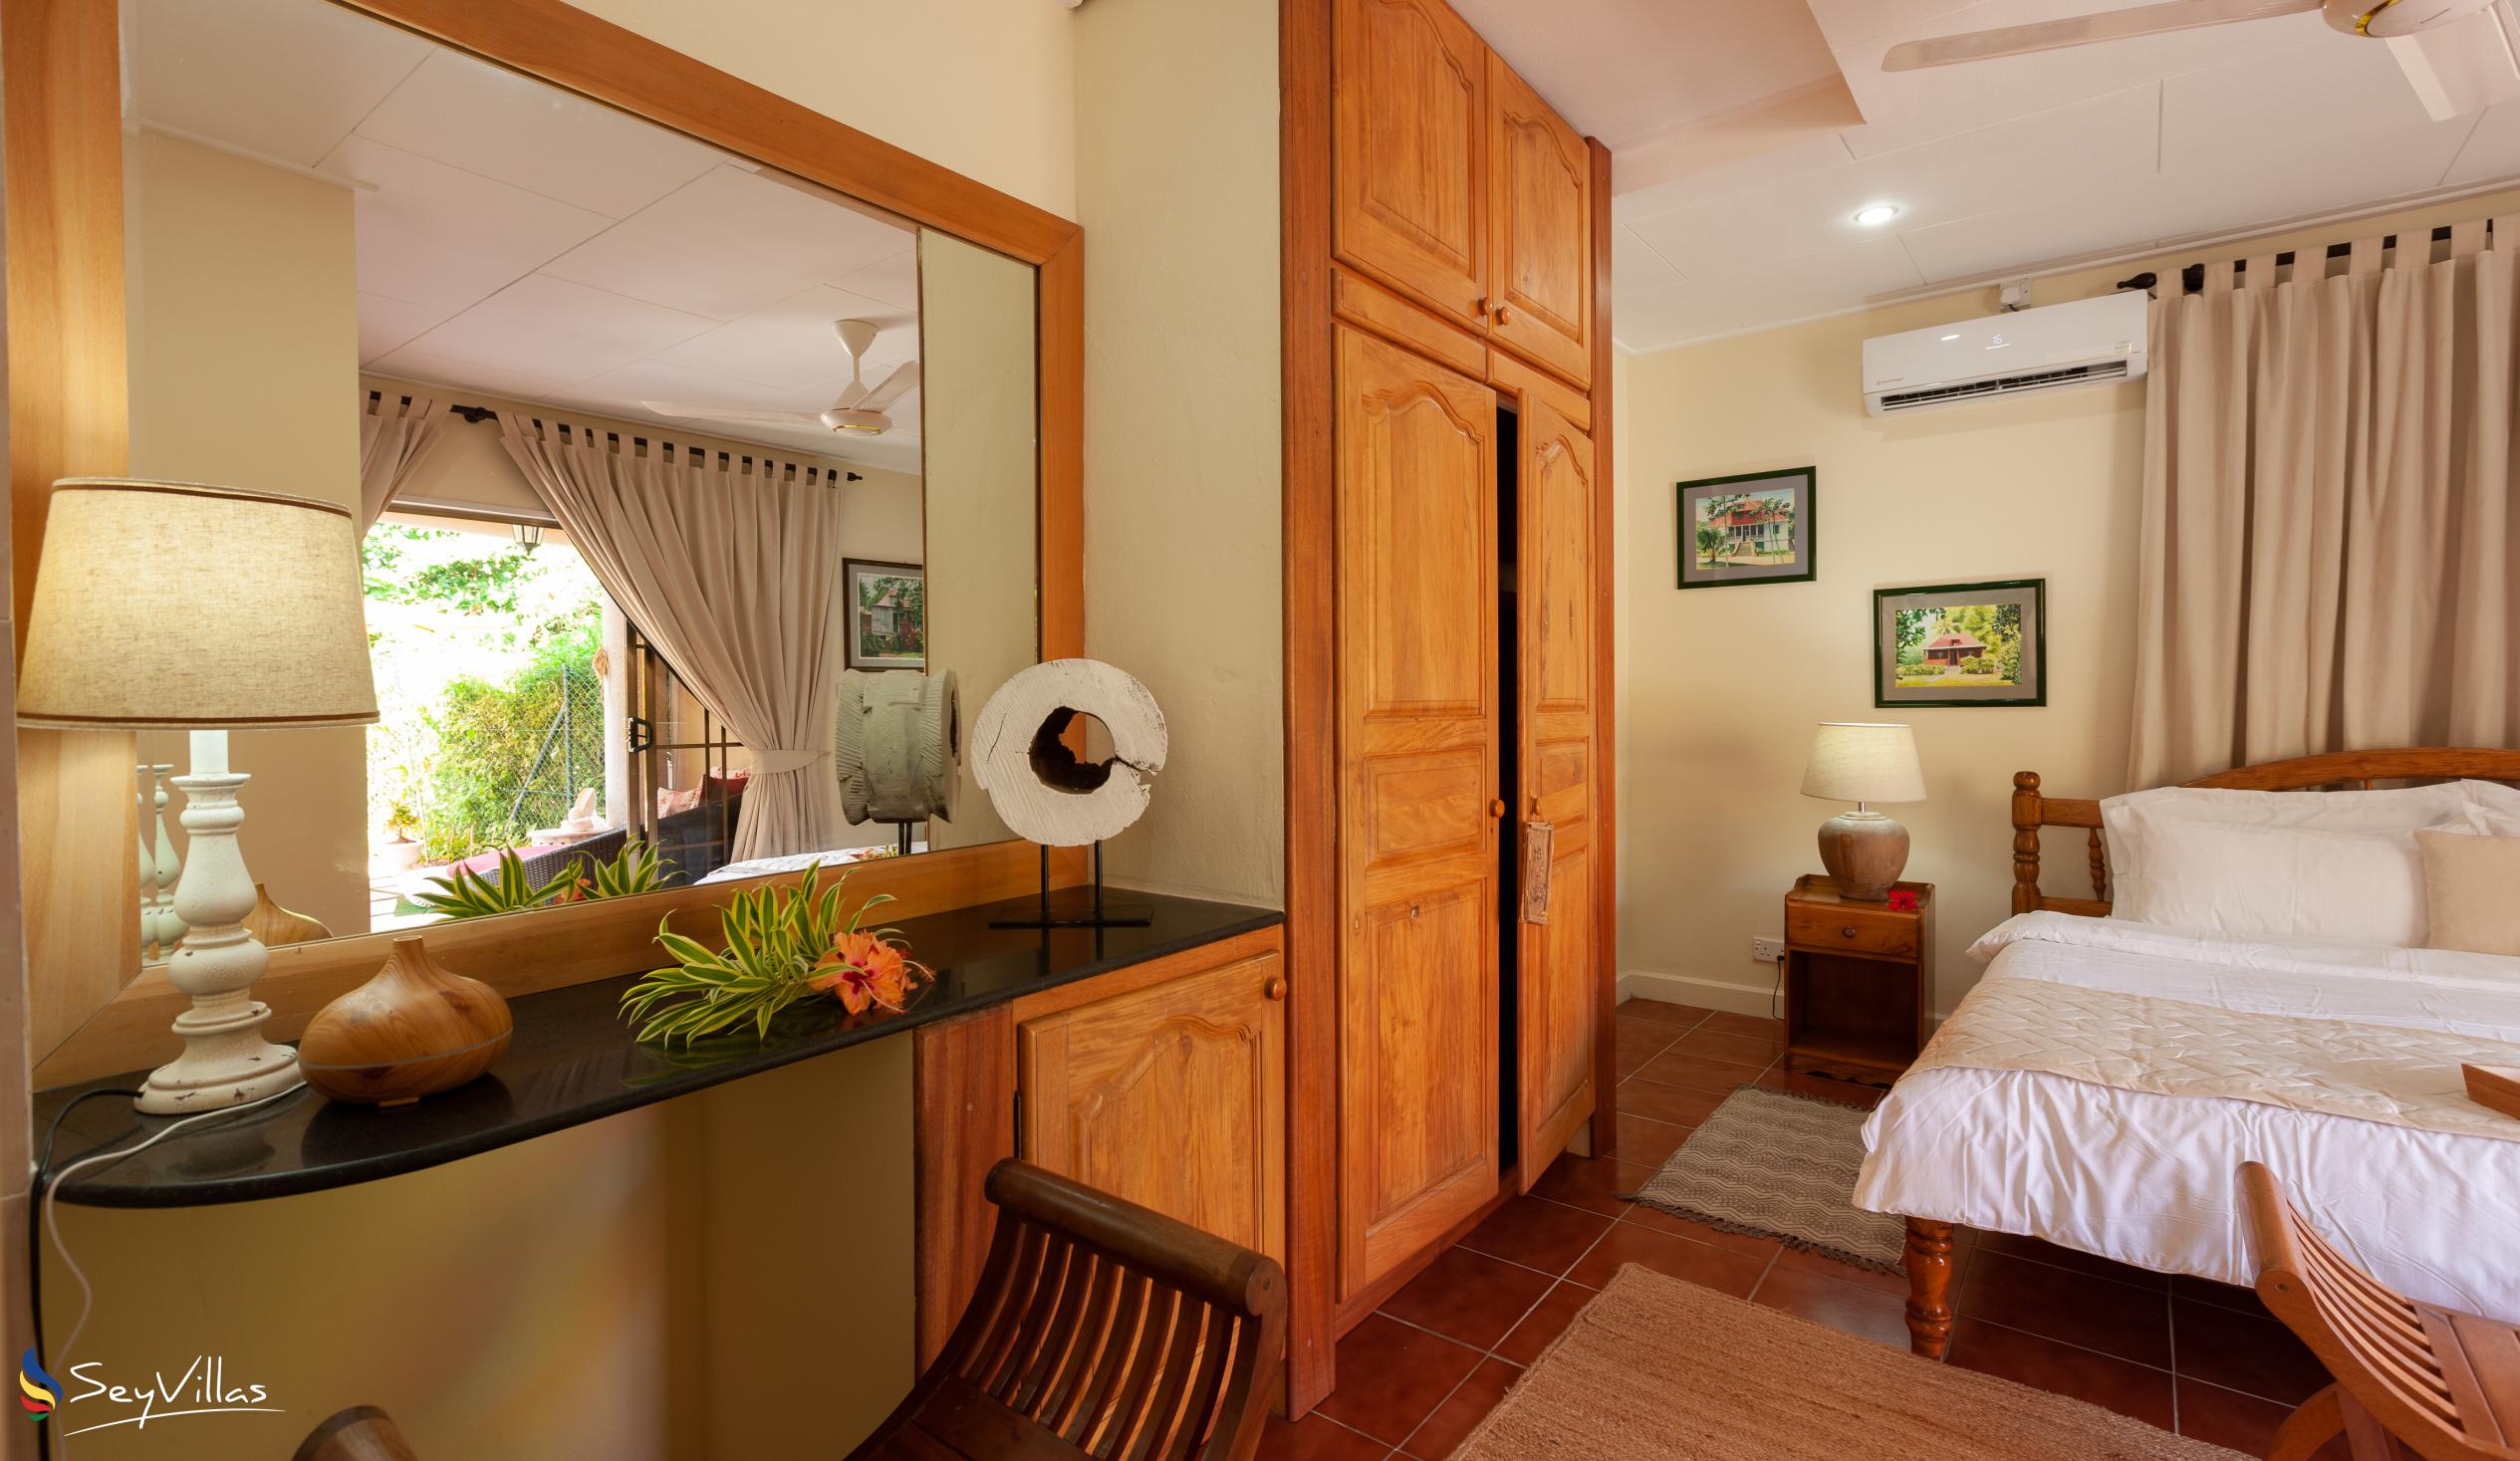 Photo 26: Oceane Self Catering - Classic Double Room - La Digue (Seychelles)